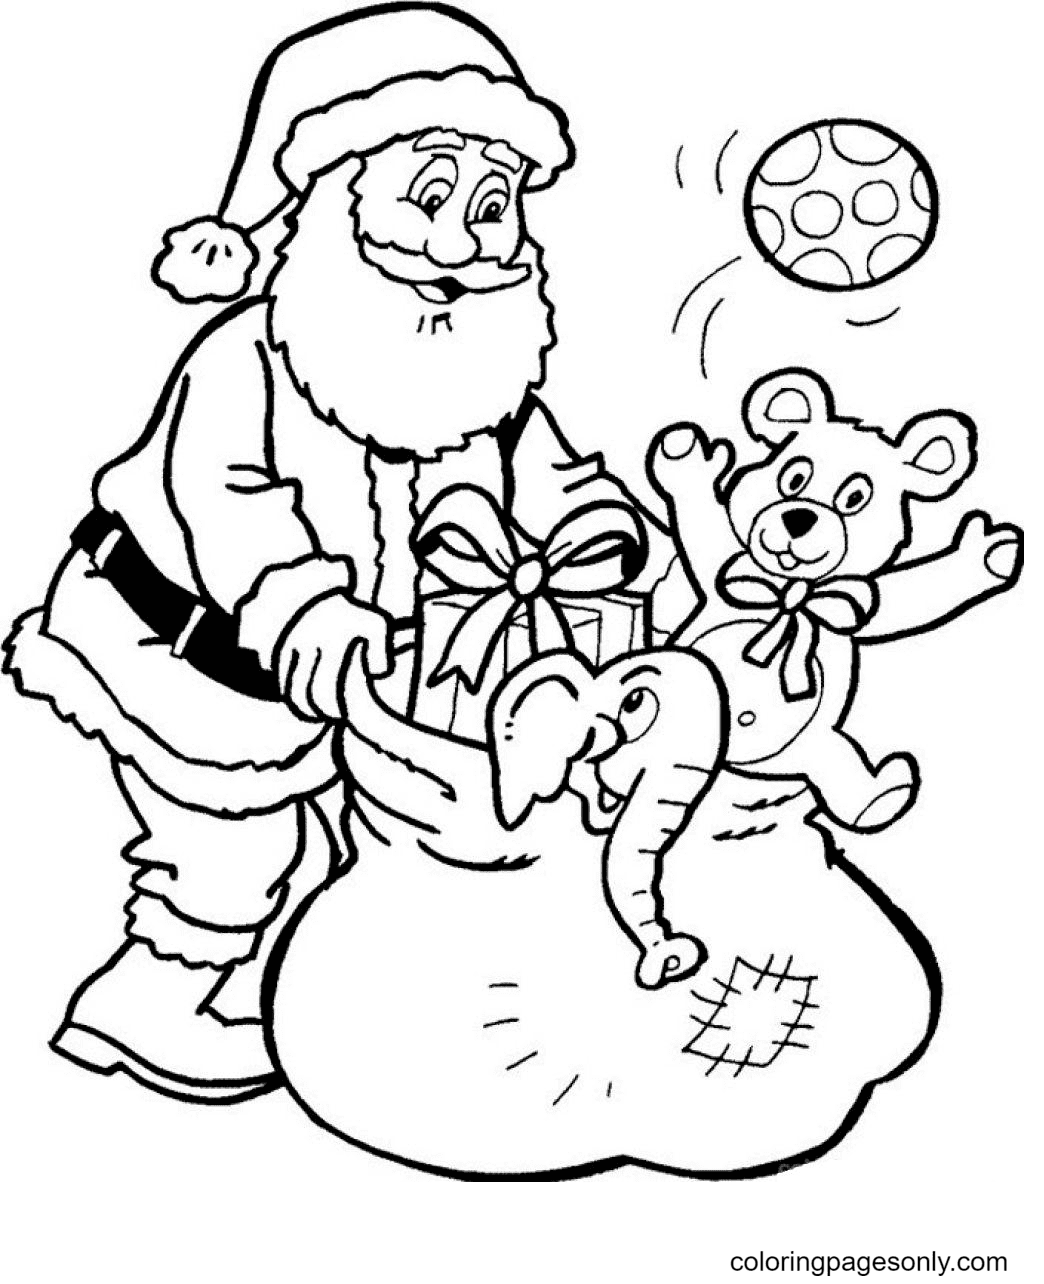 Santa claus coloring pages printable for free download